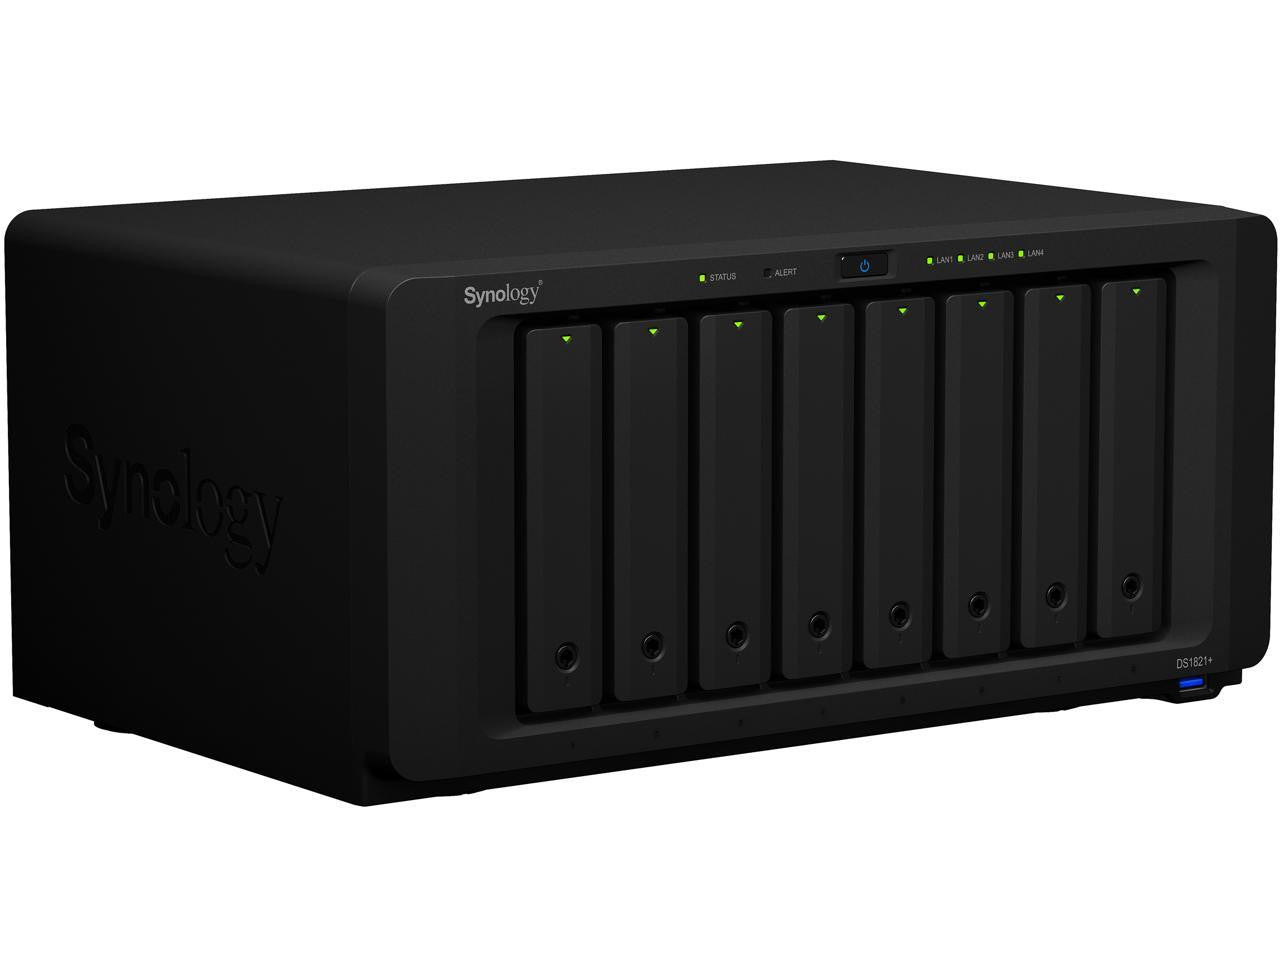 Synology DS1821+ 8-BAY DiskStation with 32GB Synology RAM and 96TB (8x12TB) Western Digital RED PLUS Drives Fully Assembled and Tested